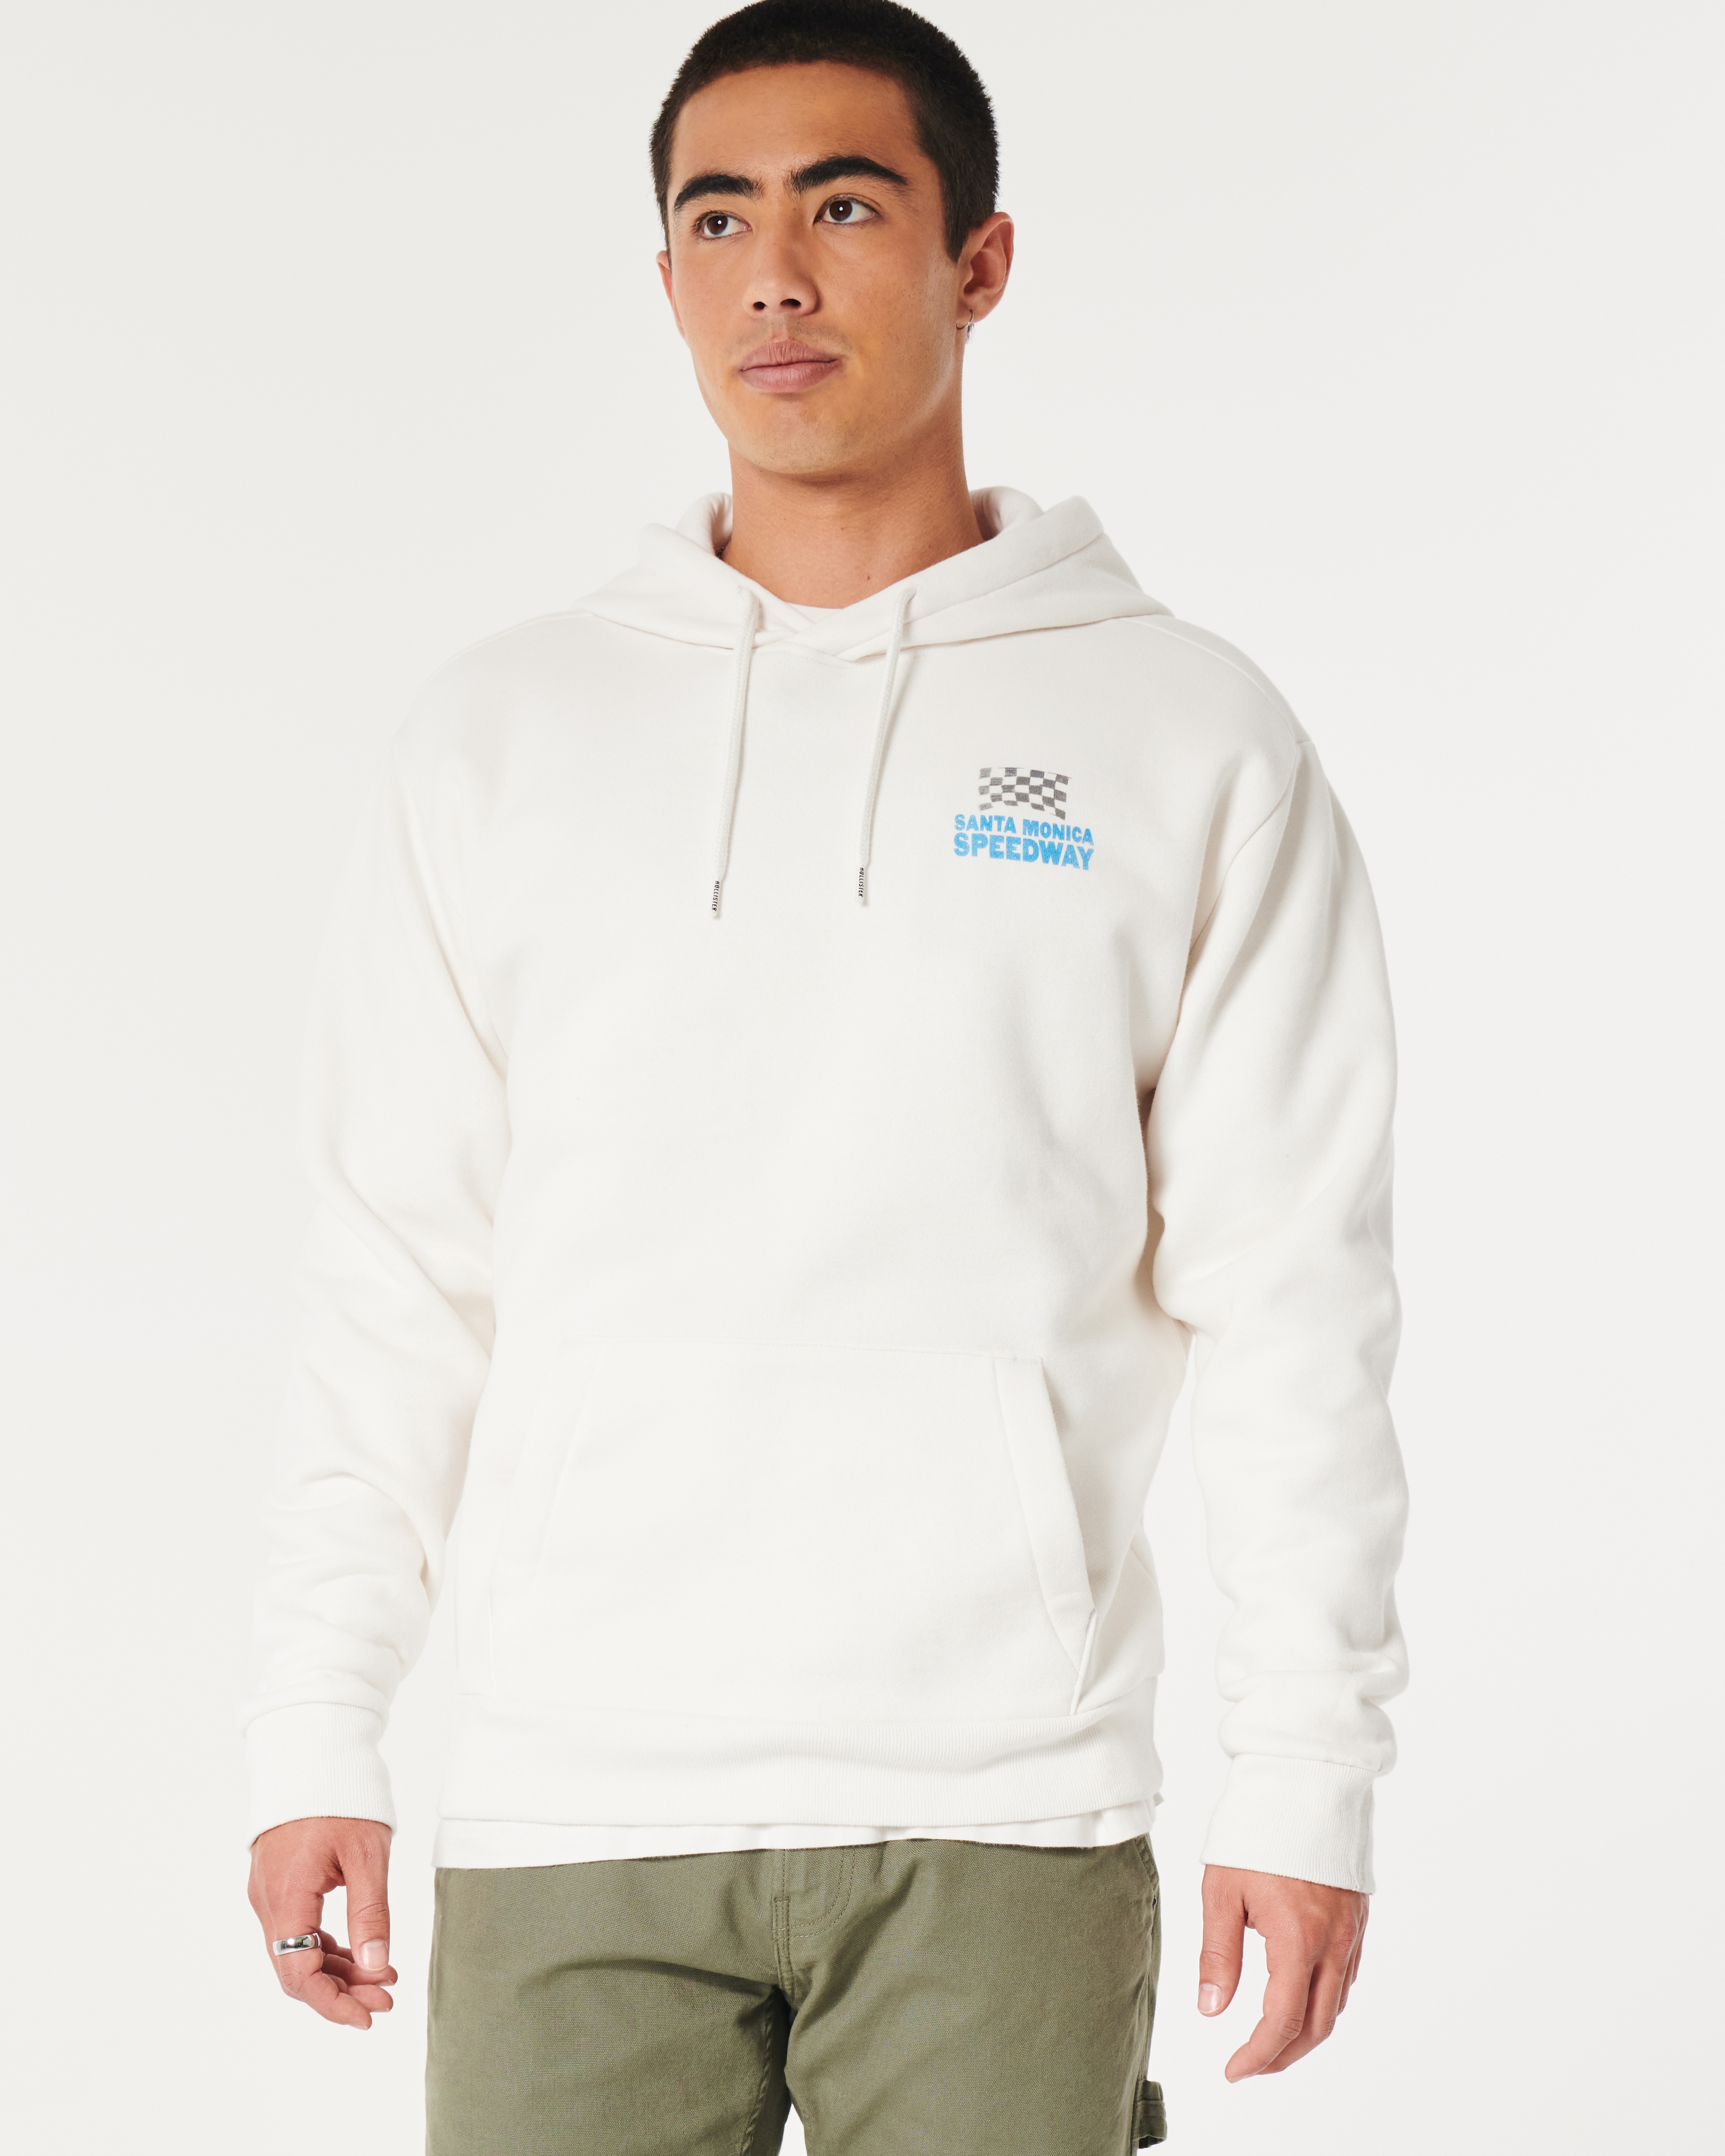 Relaxed Crosby Street Records Graphic Hoodie